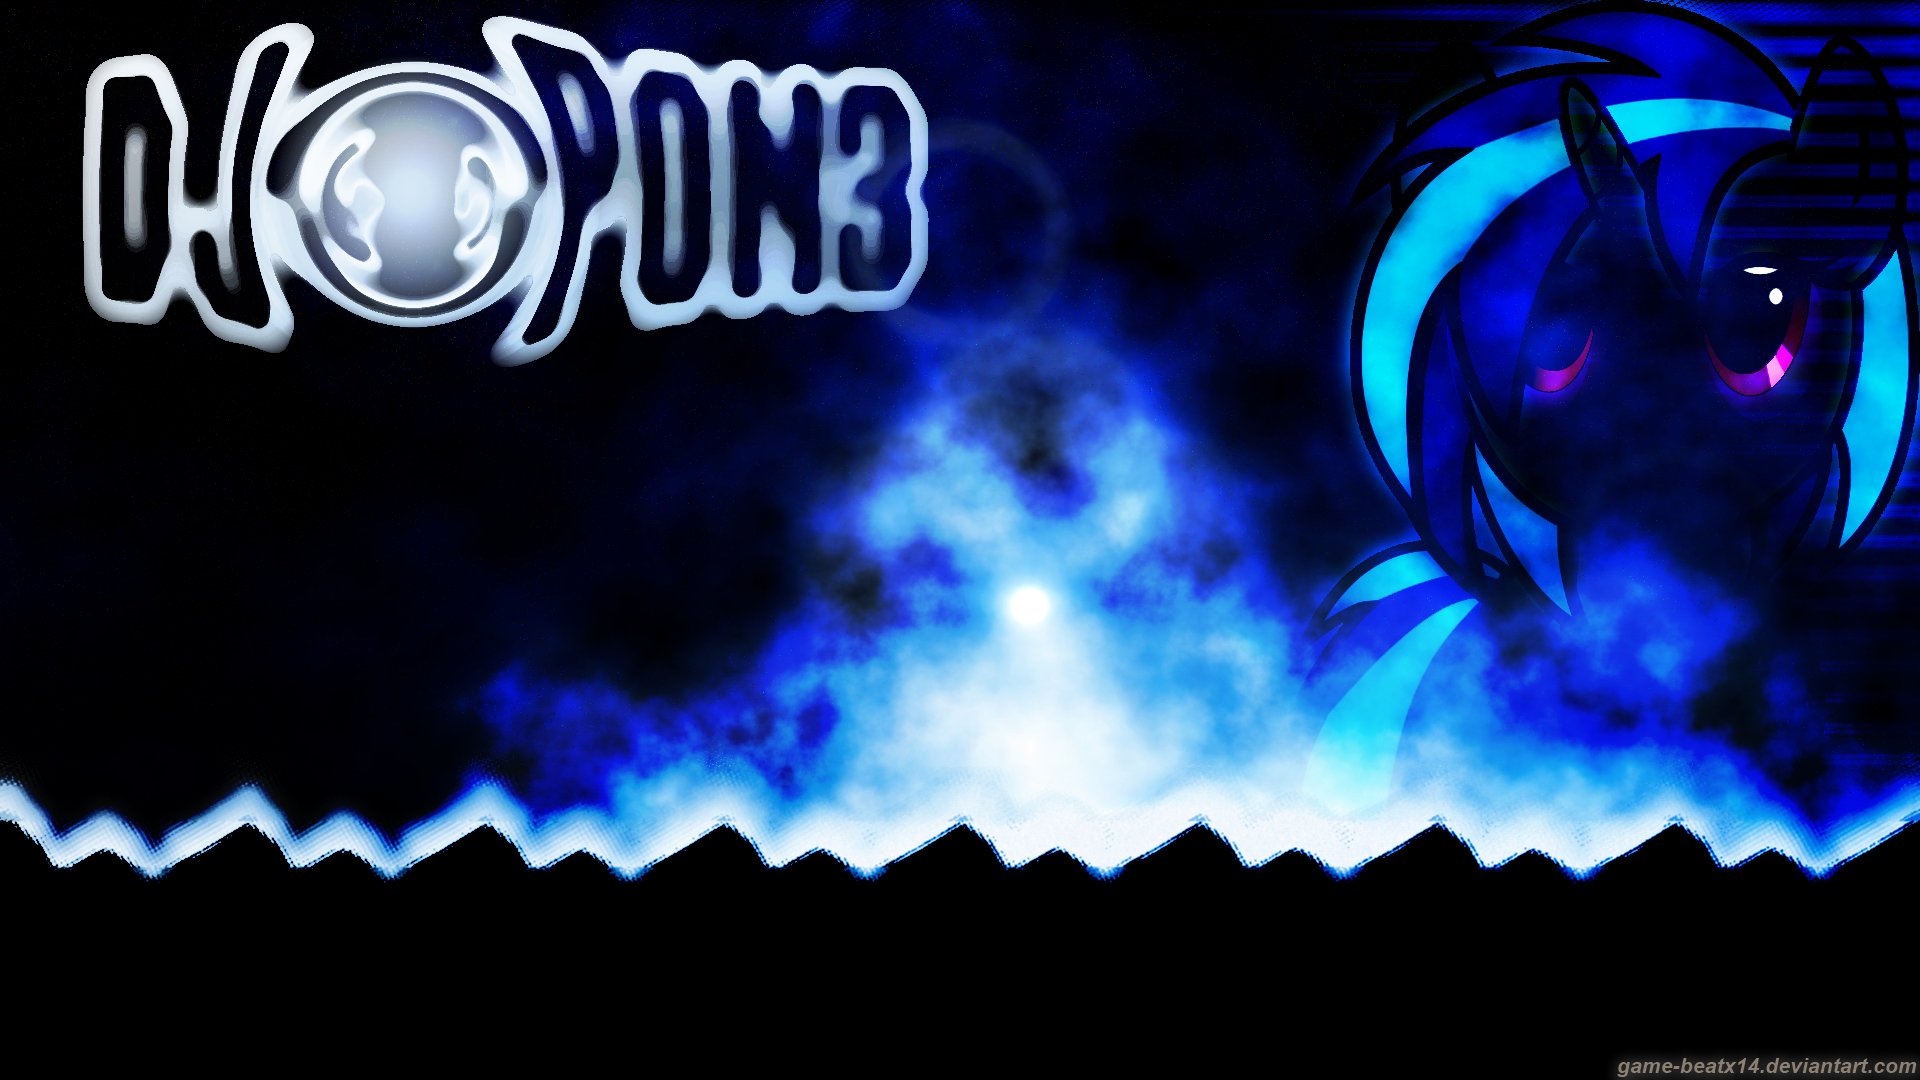 DJ-PON3 Wallpaper by Game-BeatX14 and Shelmo69